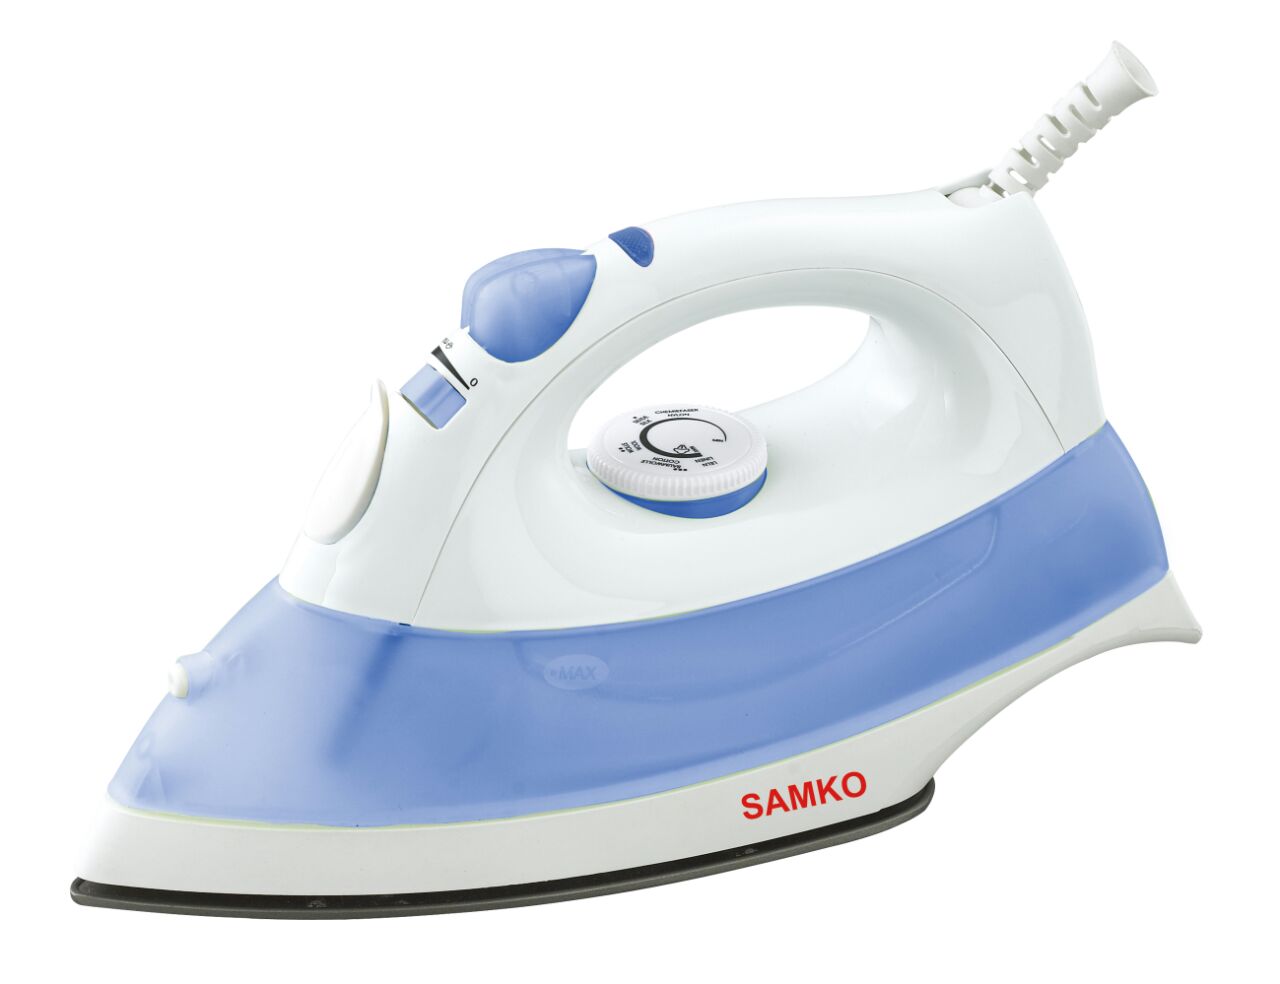 Palson Clothes Steamer 2000W Powerful Vertical Steam Iron 3.5L With Garment Hanger & Fabric Brush Free 2 Year Warranty